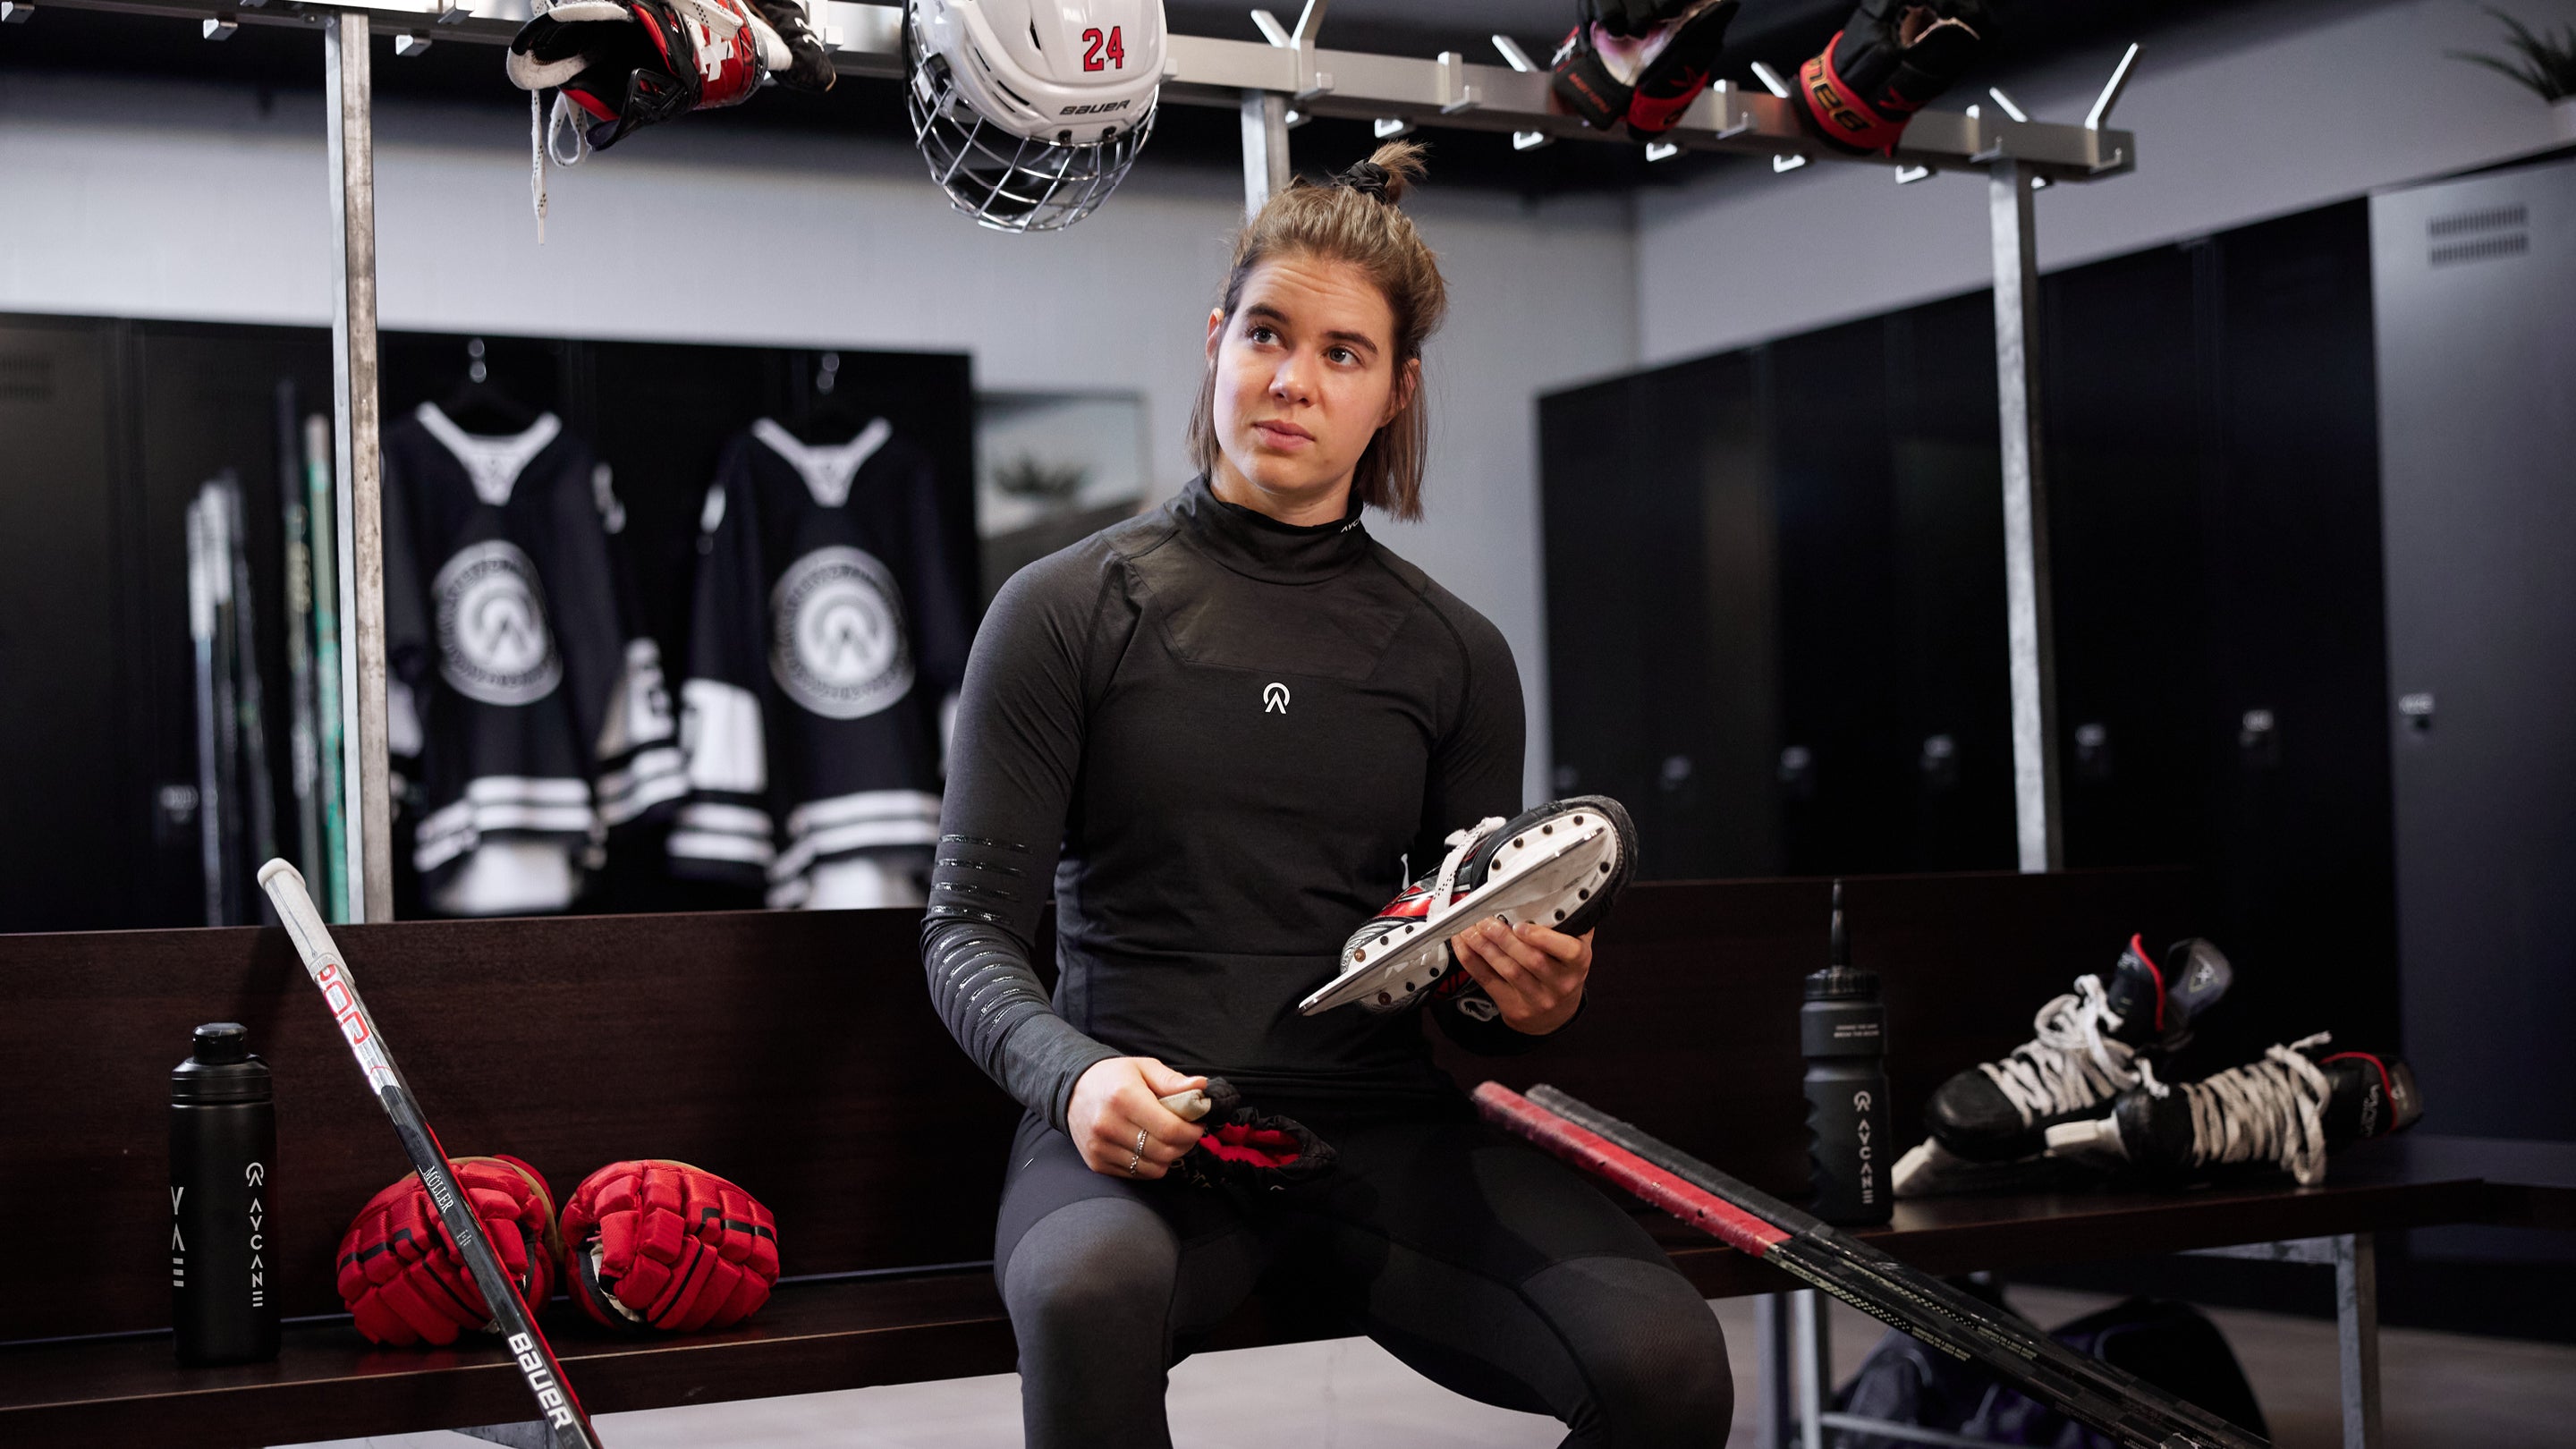 Choosing the Right Ice Hockey Skates: A Buyer's Guide